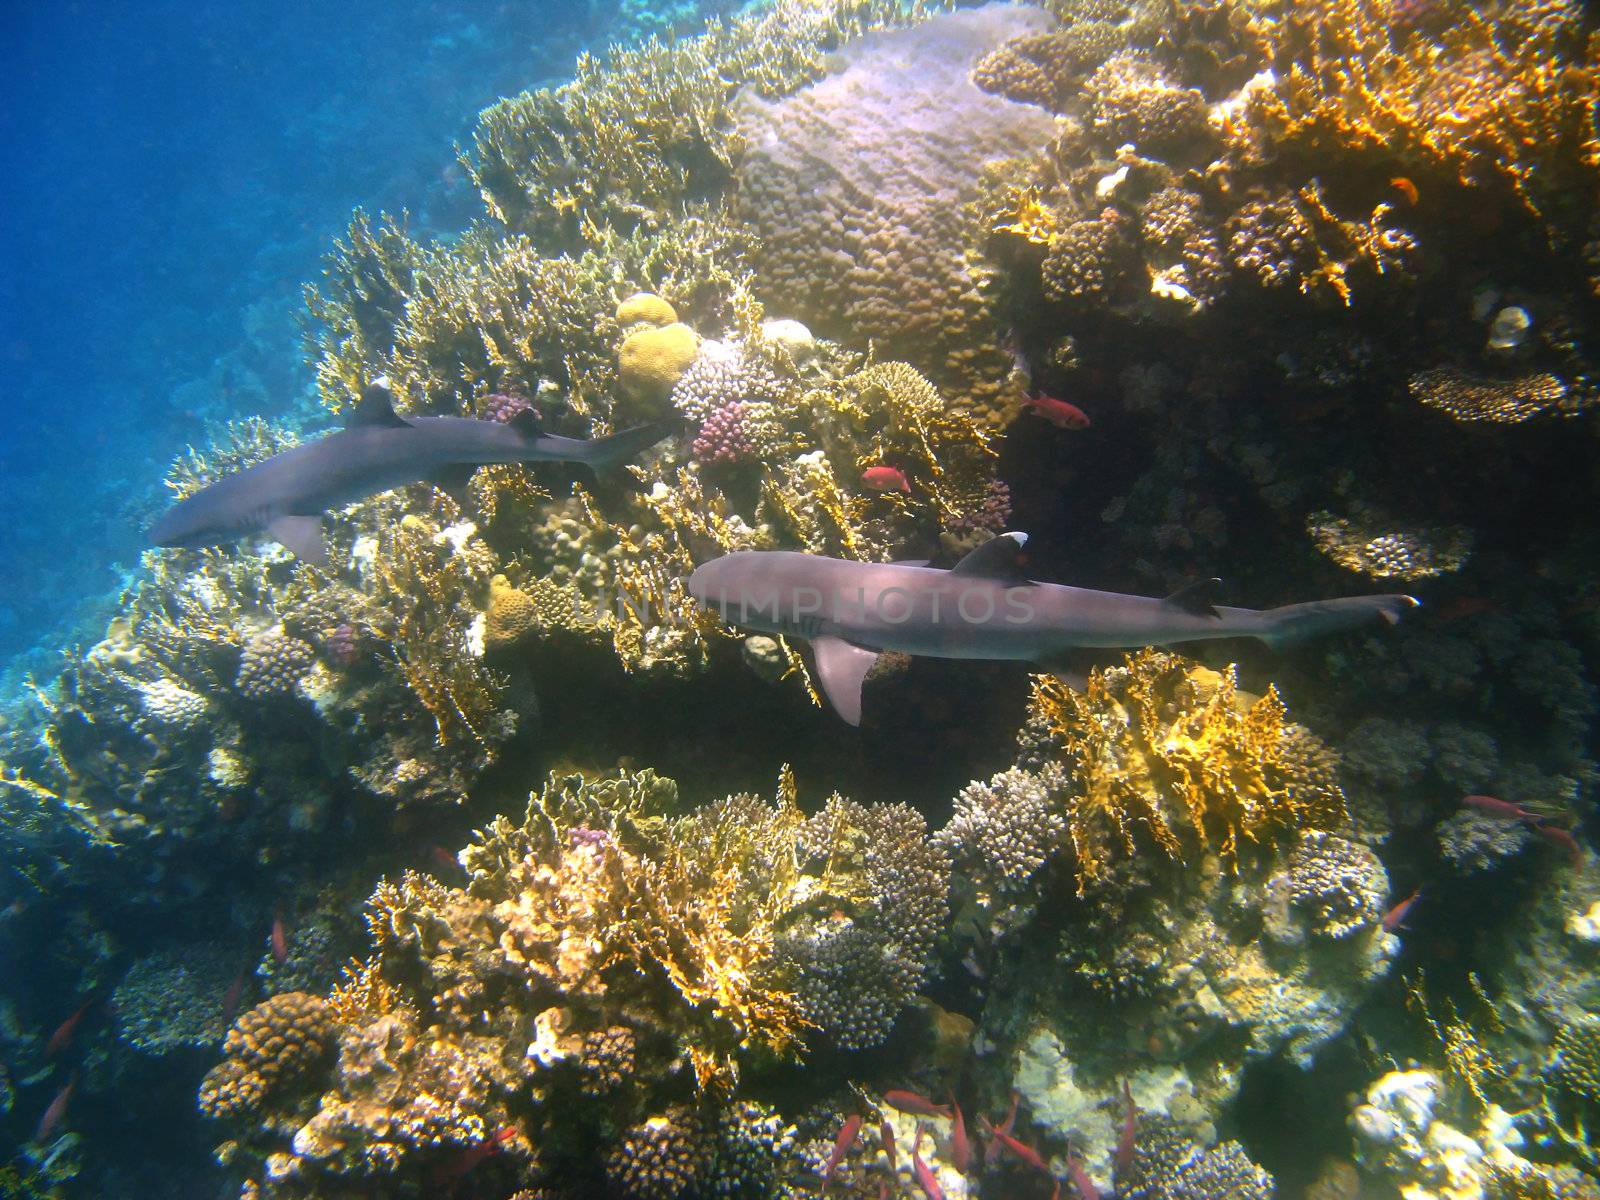 Whitetip reef sharks and coral reef by vintrom